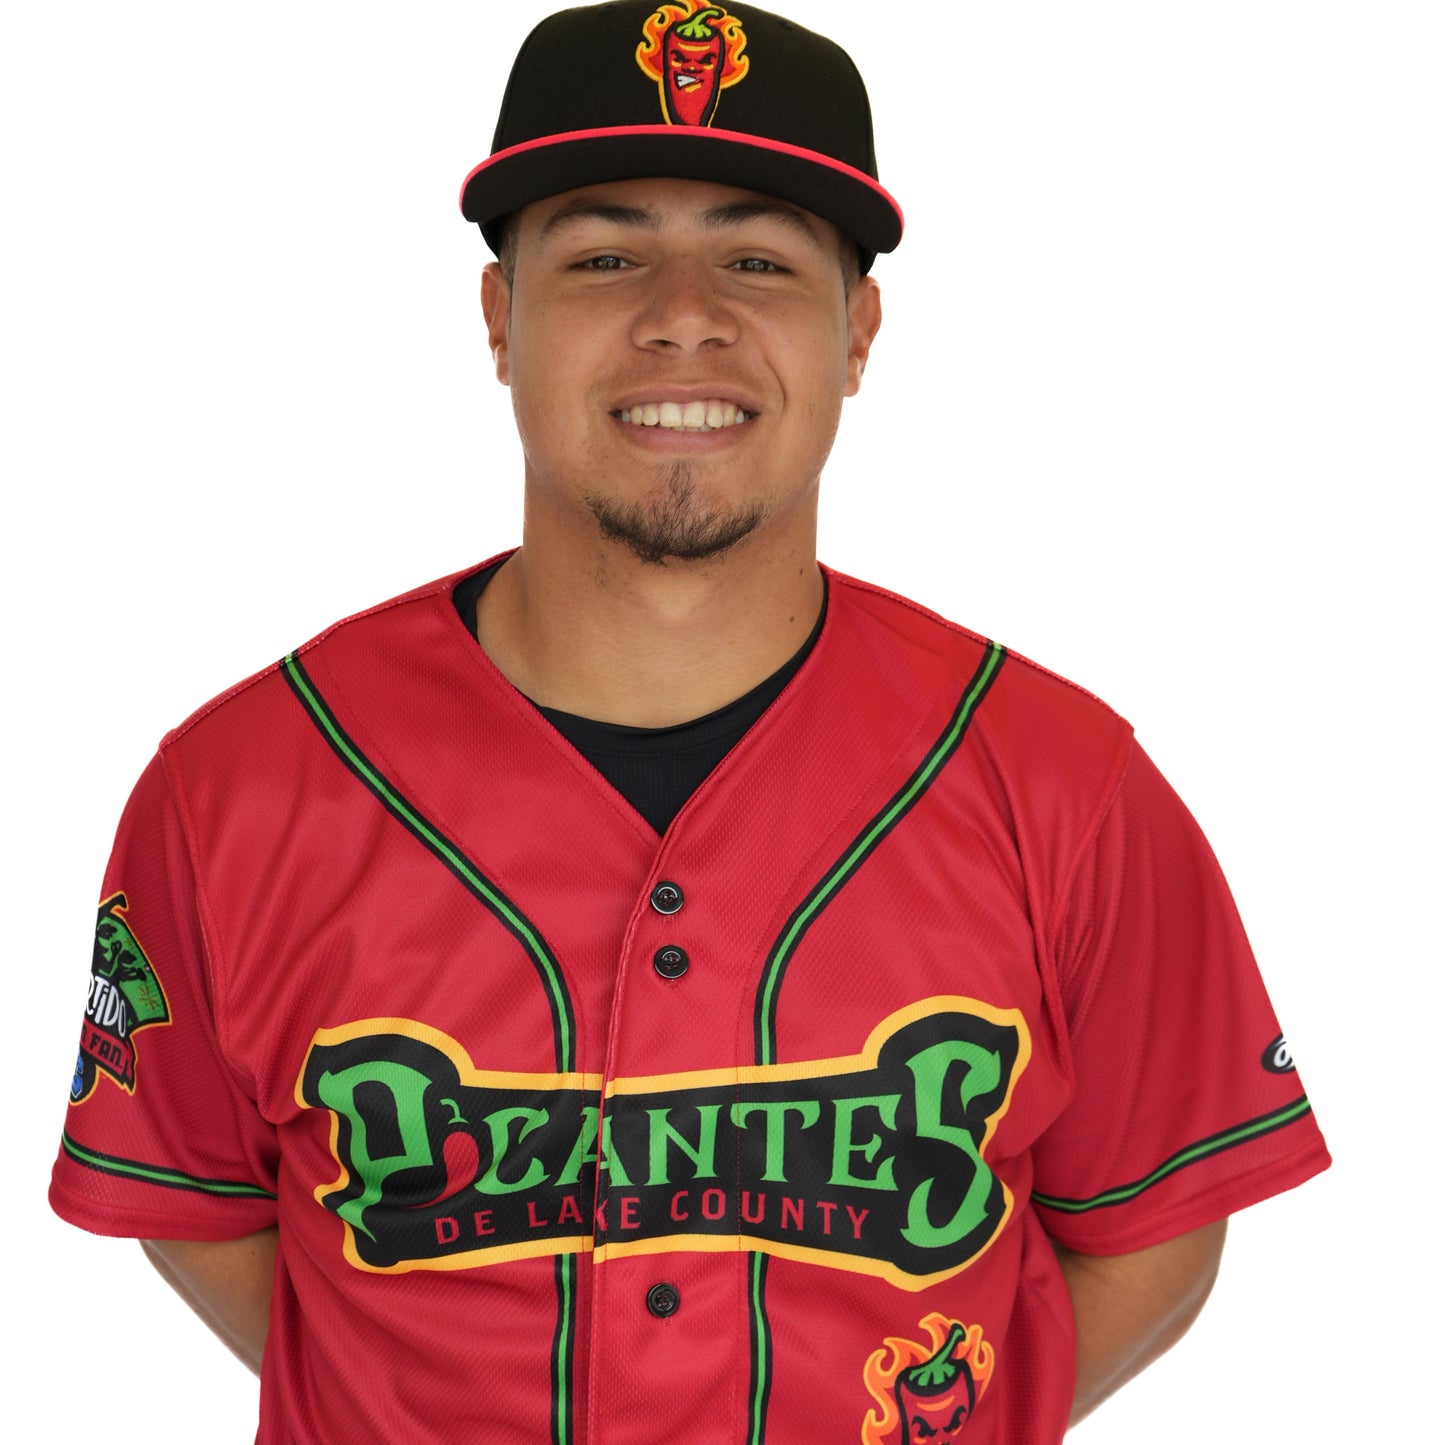 Official Player Worn Picantes de Lake County Jerseys